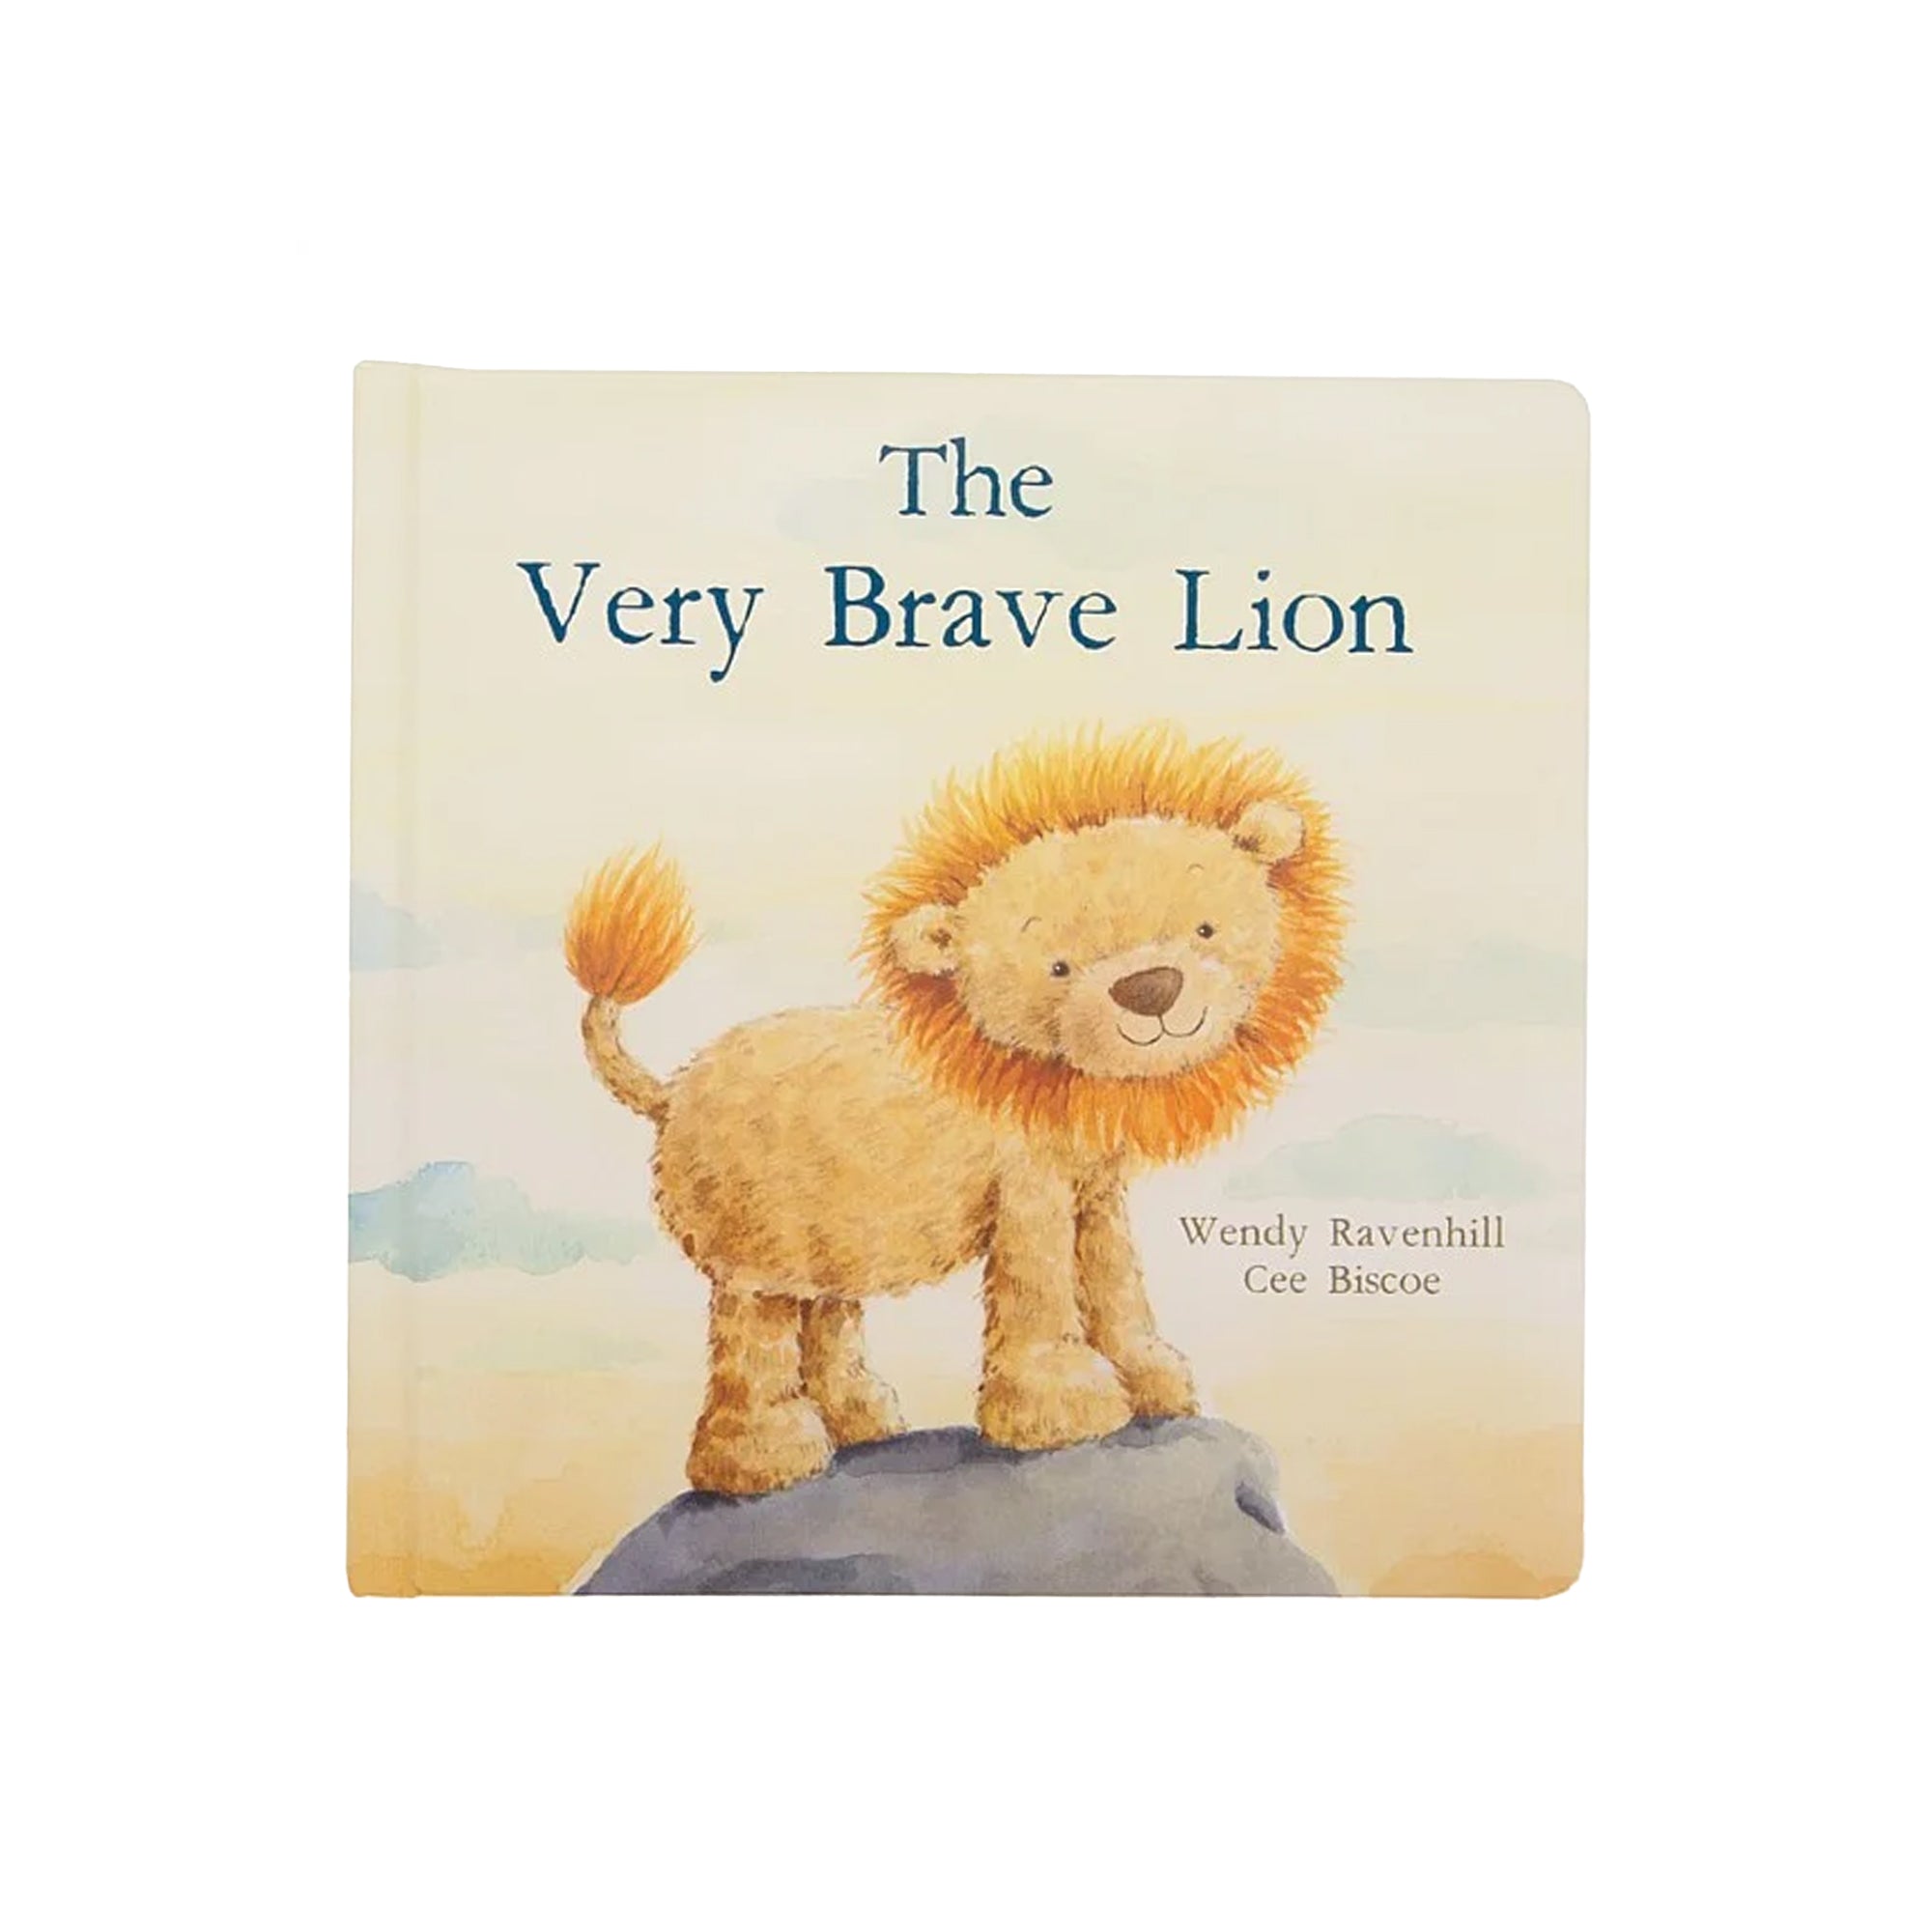 The Very Brave Lion